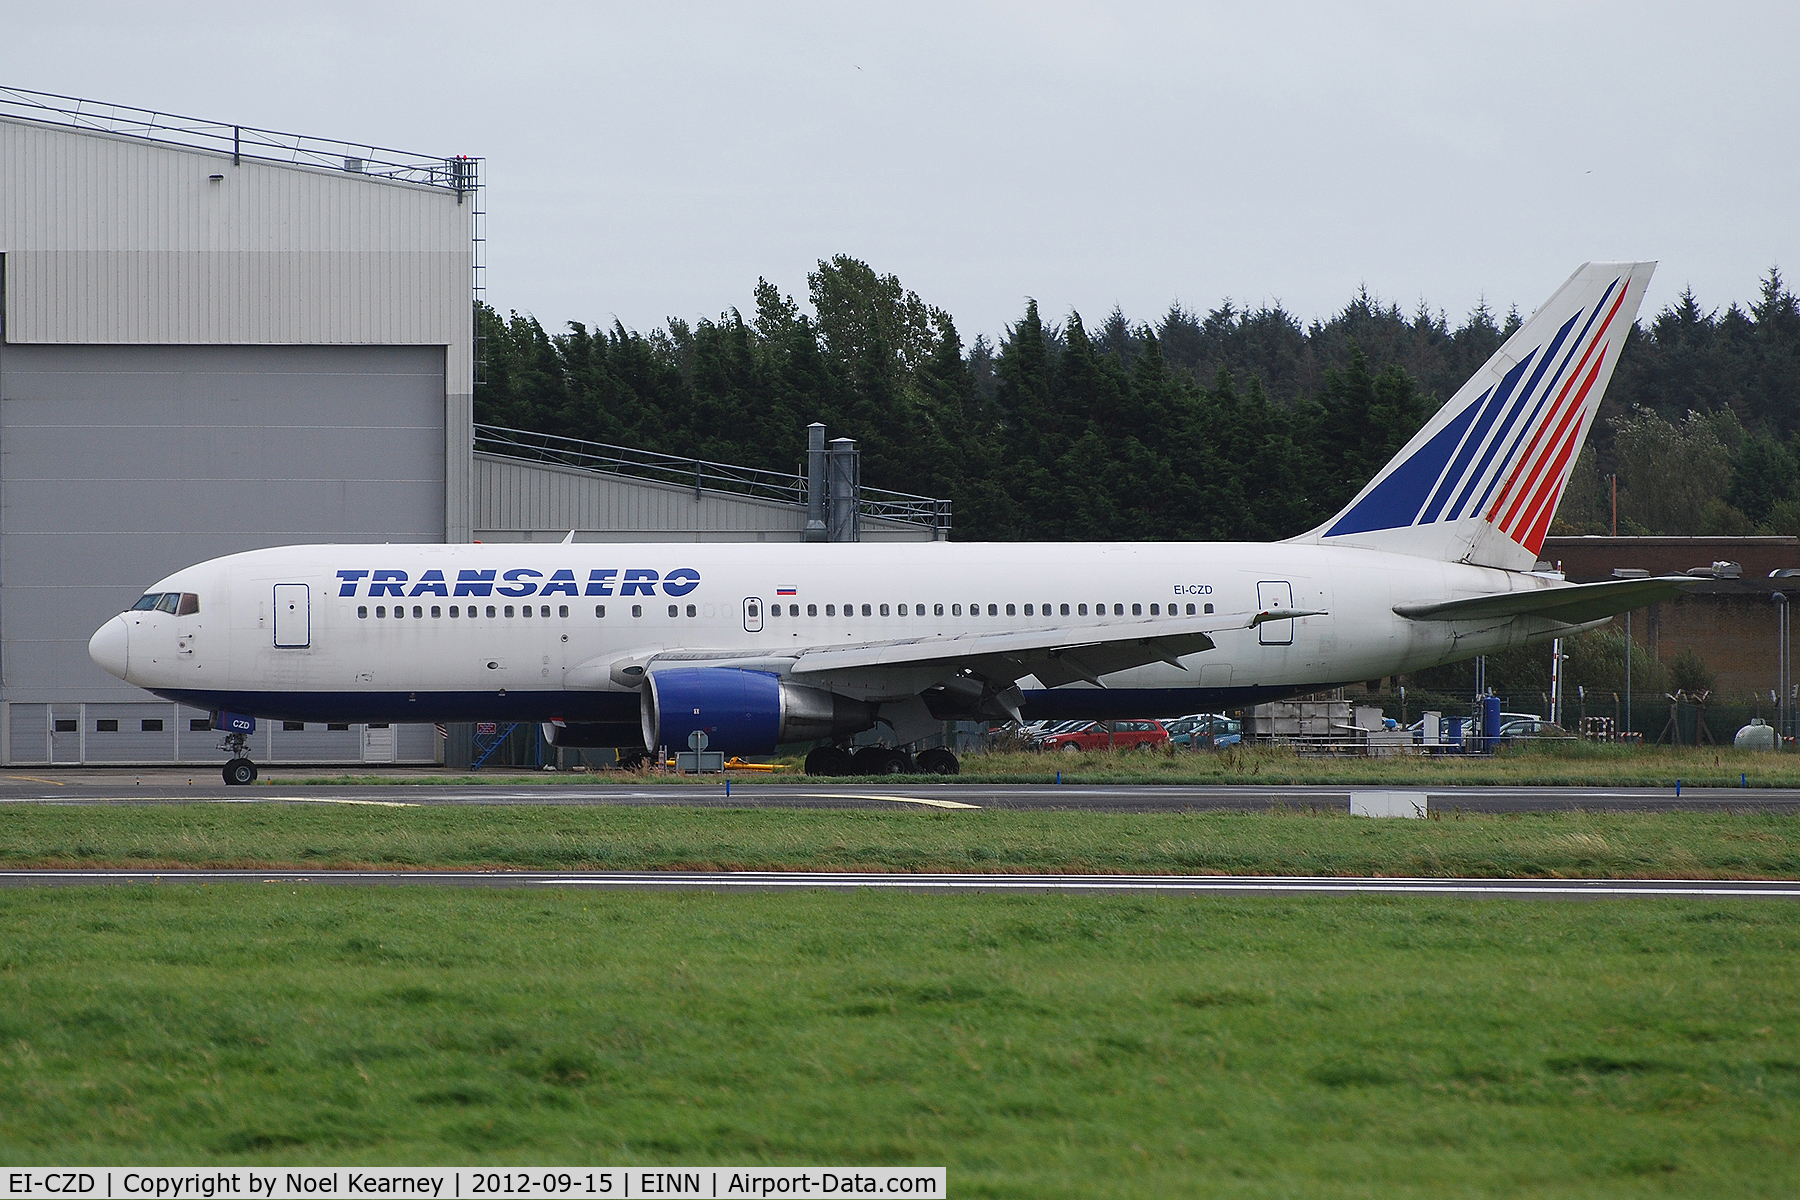 EI-CZD, 1986 Boeing 767-216 C/N 23623, Seen parked outside the Transaero maintenance hangers at Shannon.